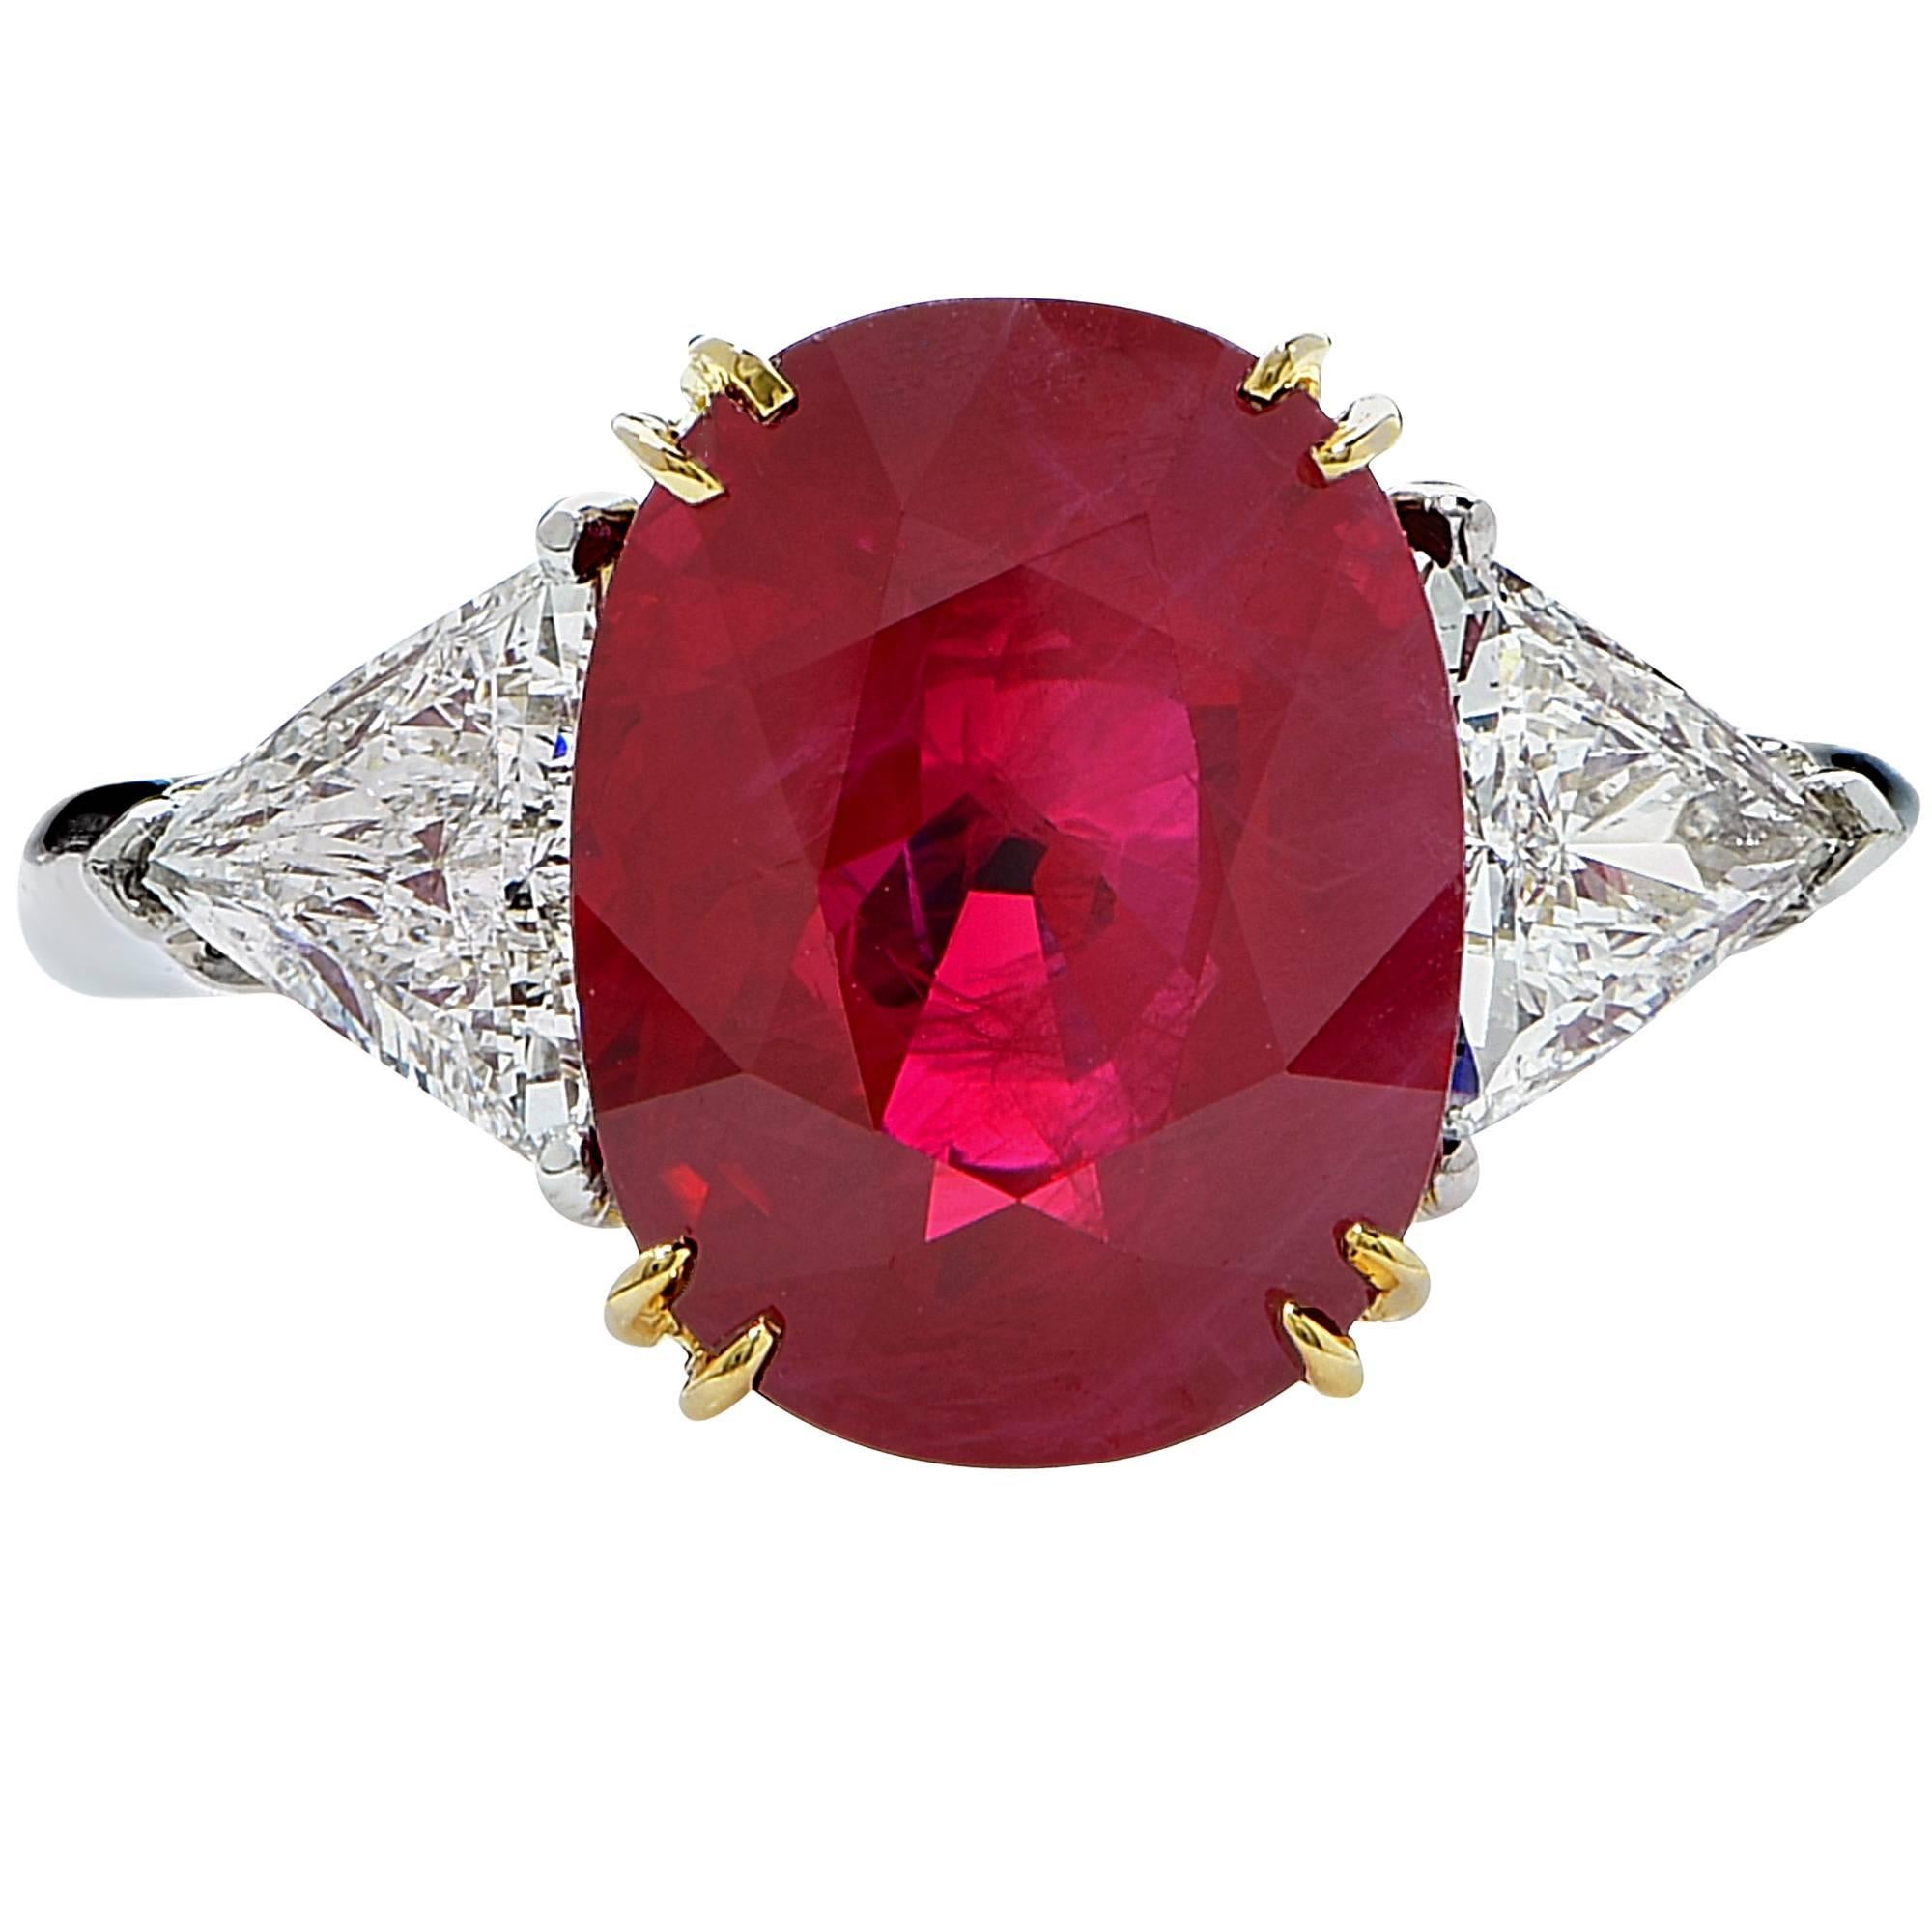 Platinum and 18k yellow gold hand-made ring featuring a 5.15ct oval cut vibrant red Burma Ruby flanked by 2 trillion cut diamonds weighing approximately 1ct total F color VS clarity.

This gorgeous ring is a size 5.75 and can be sized up or